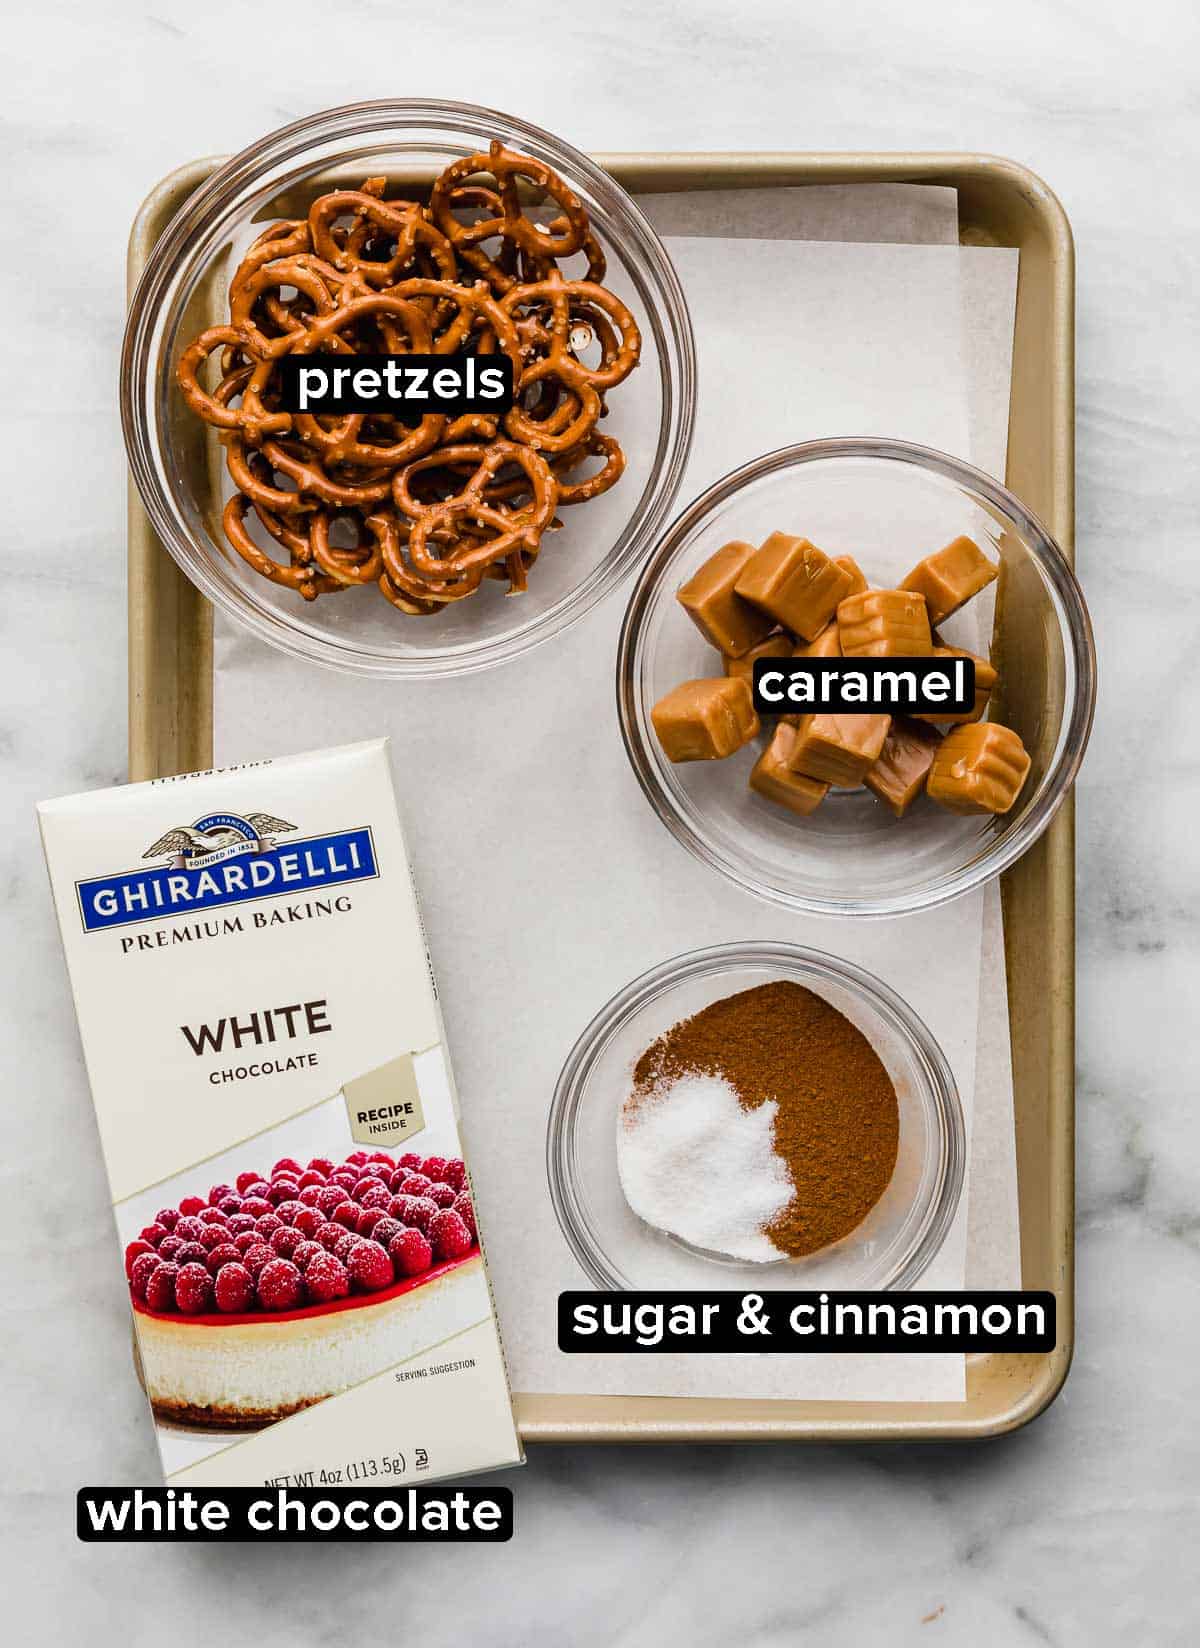 A baking sheet with white chocolate bar, pretzels, caramel, and cinnamon sugar on it, used to make snickerdoodle pretzels.